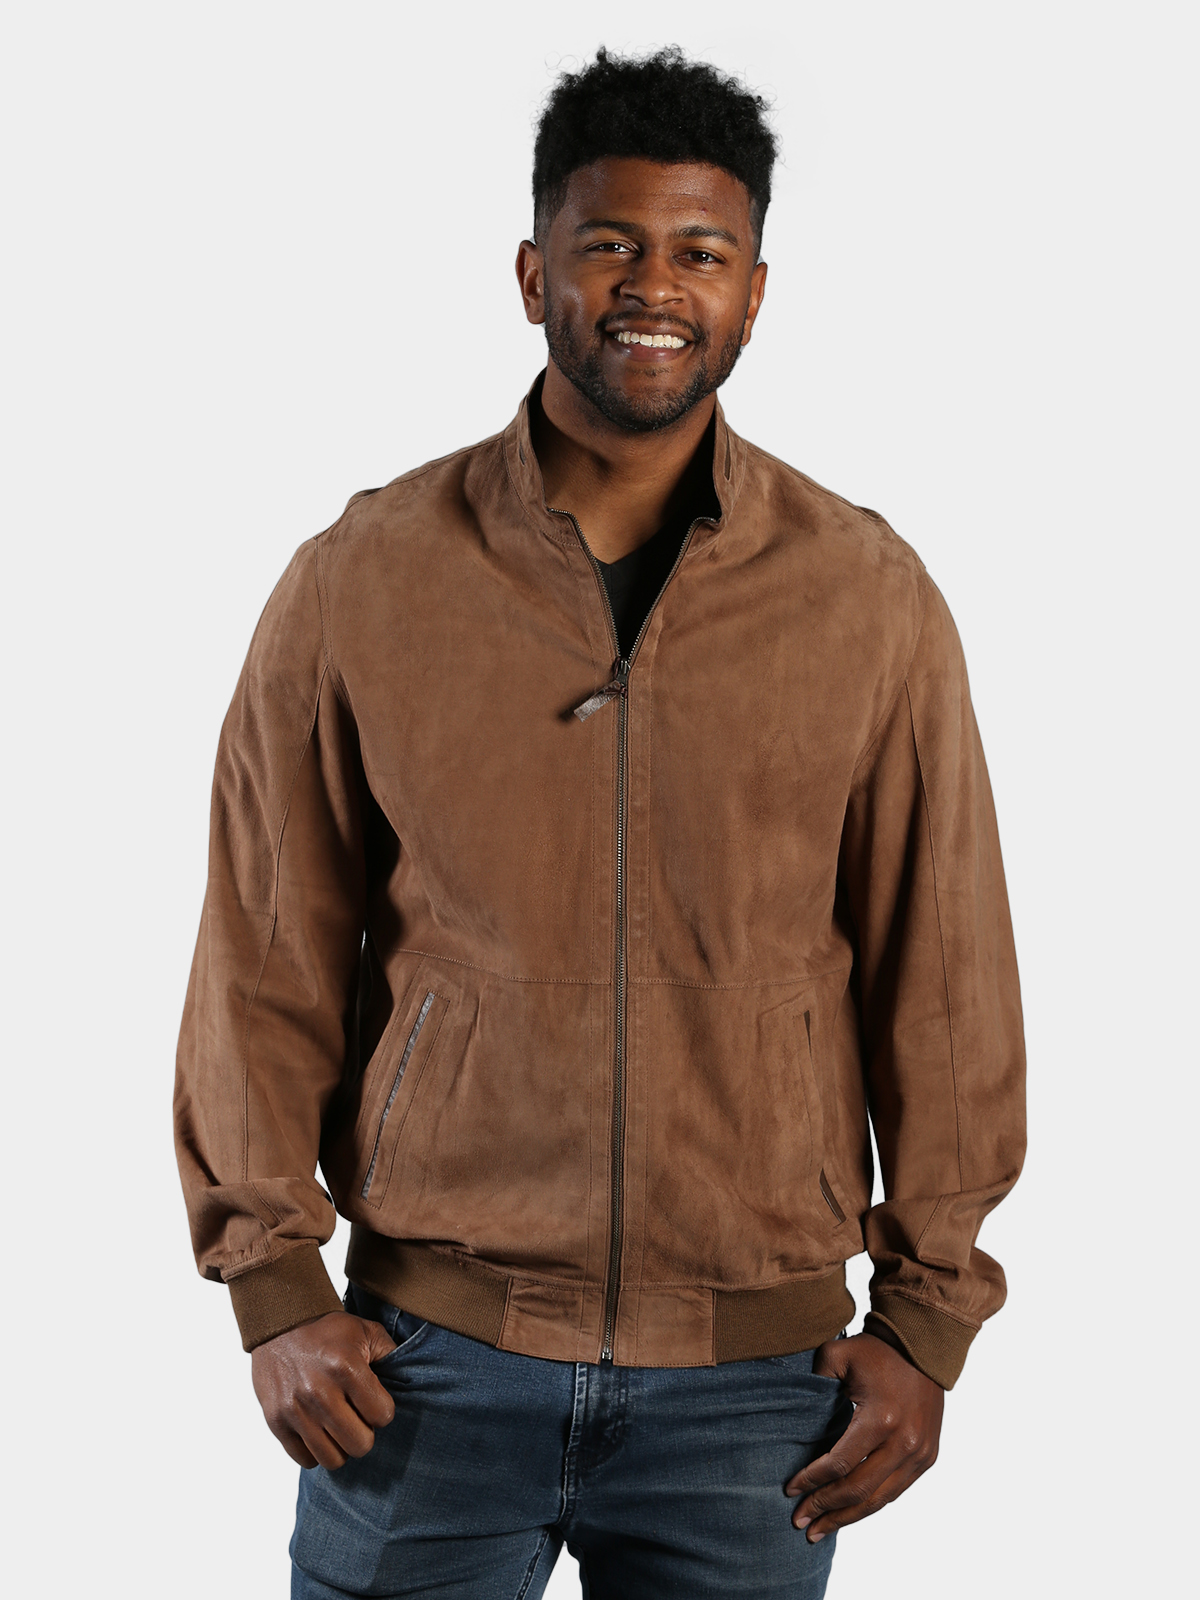 Man's Warm Sand Suede Leather Jacket Reversible to Brown Leather